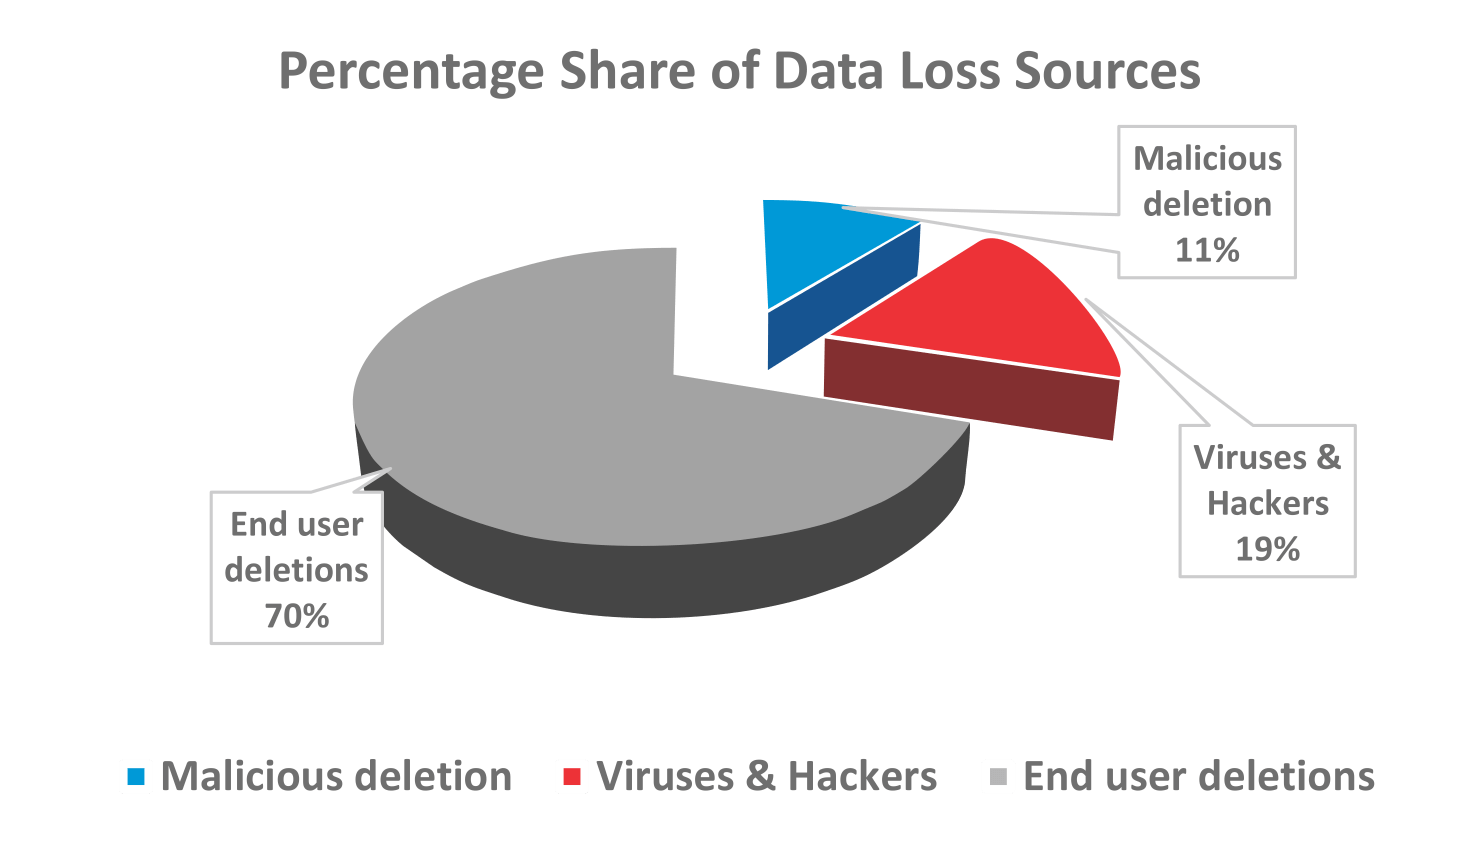 Chart 1: Causes & Share of Data Loss According to a Research by Gartner